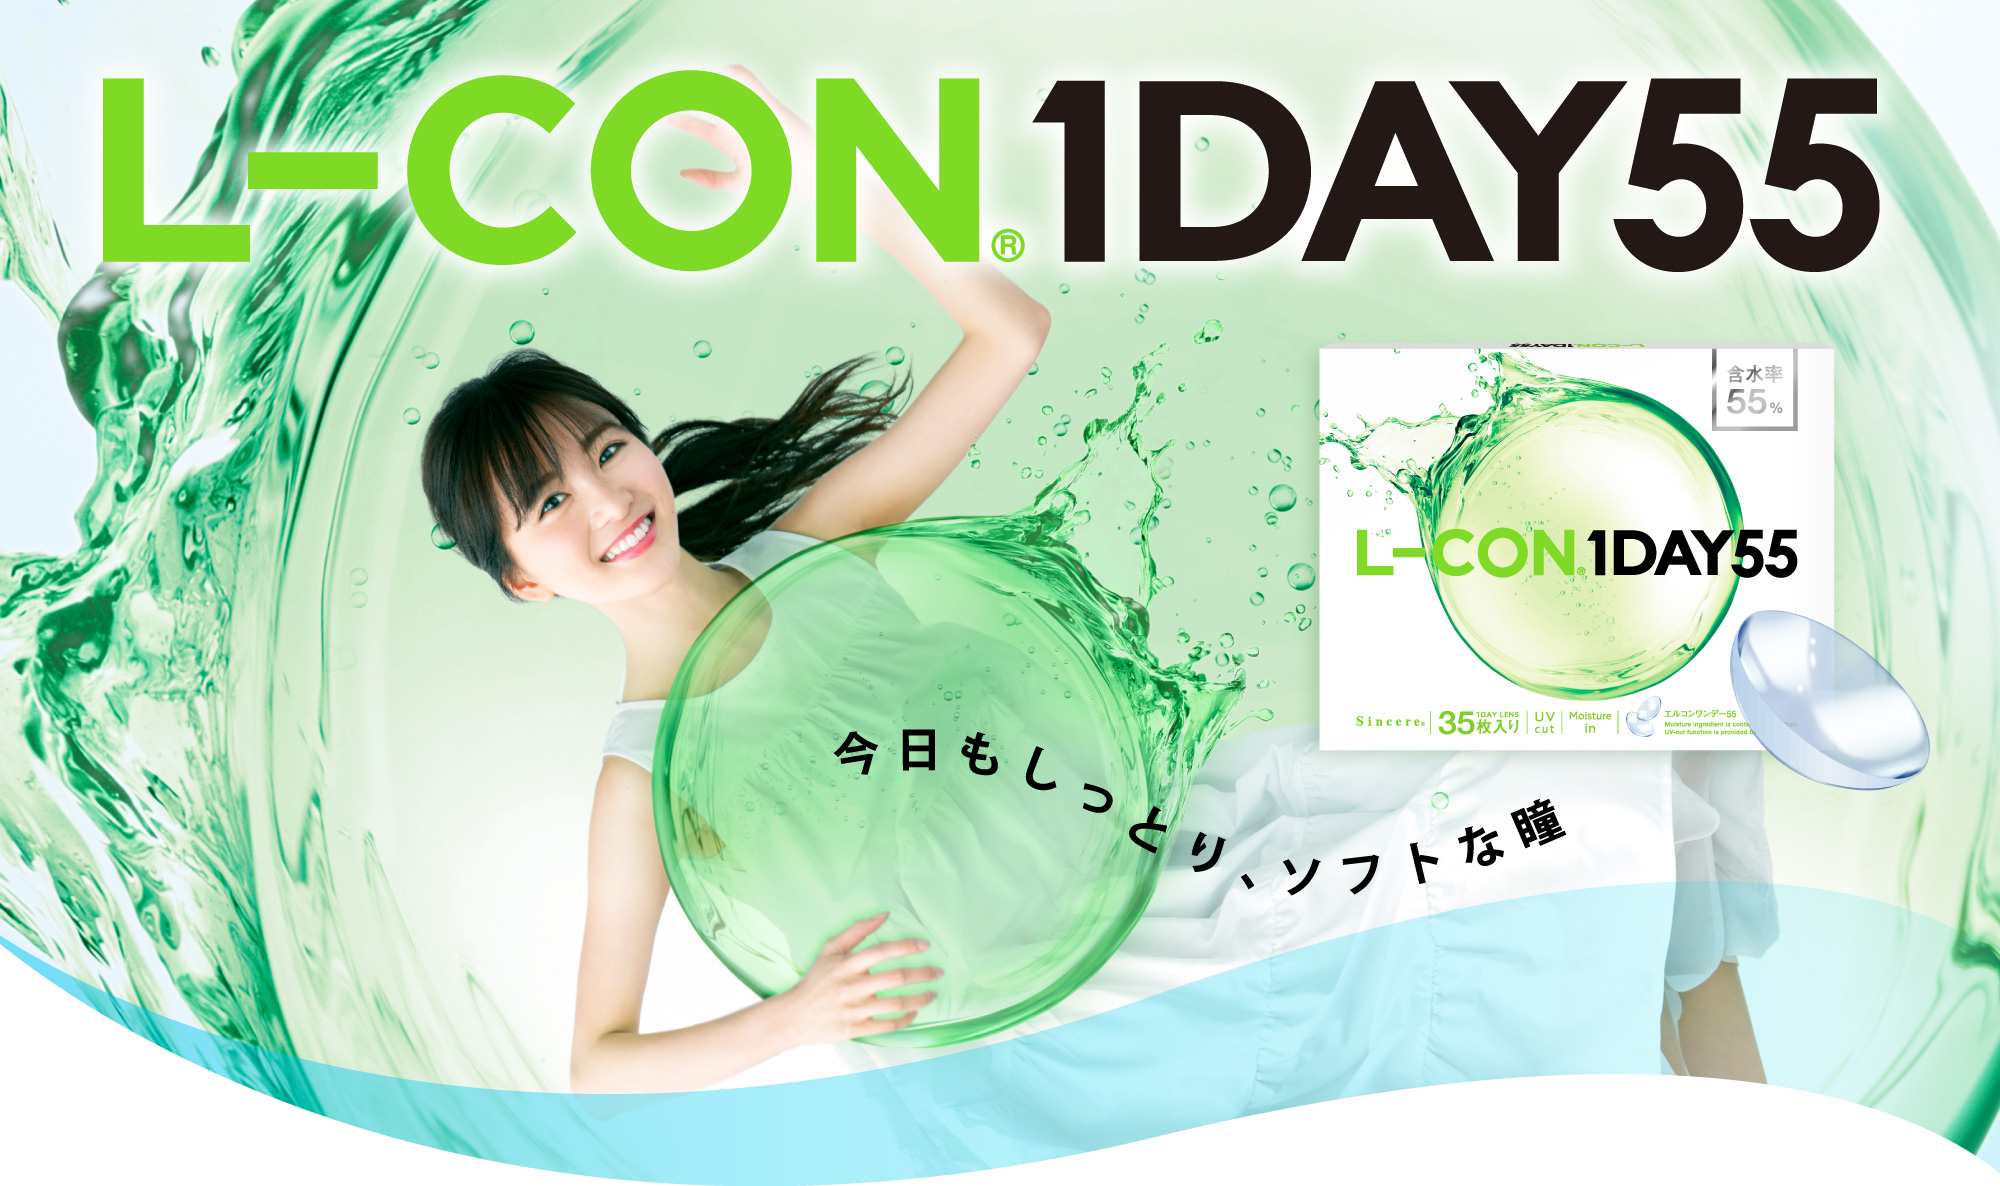 L-CON® 1DAY55　今日もしっとりソフトな瞳